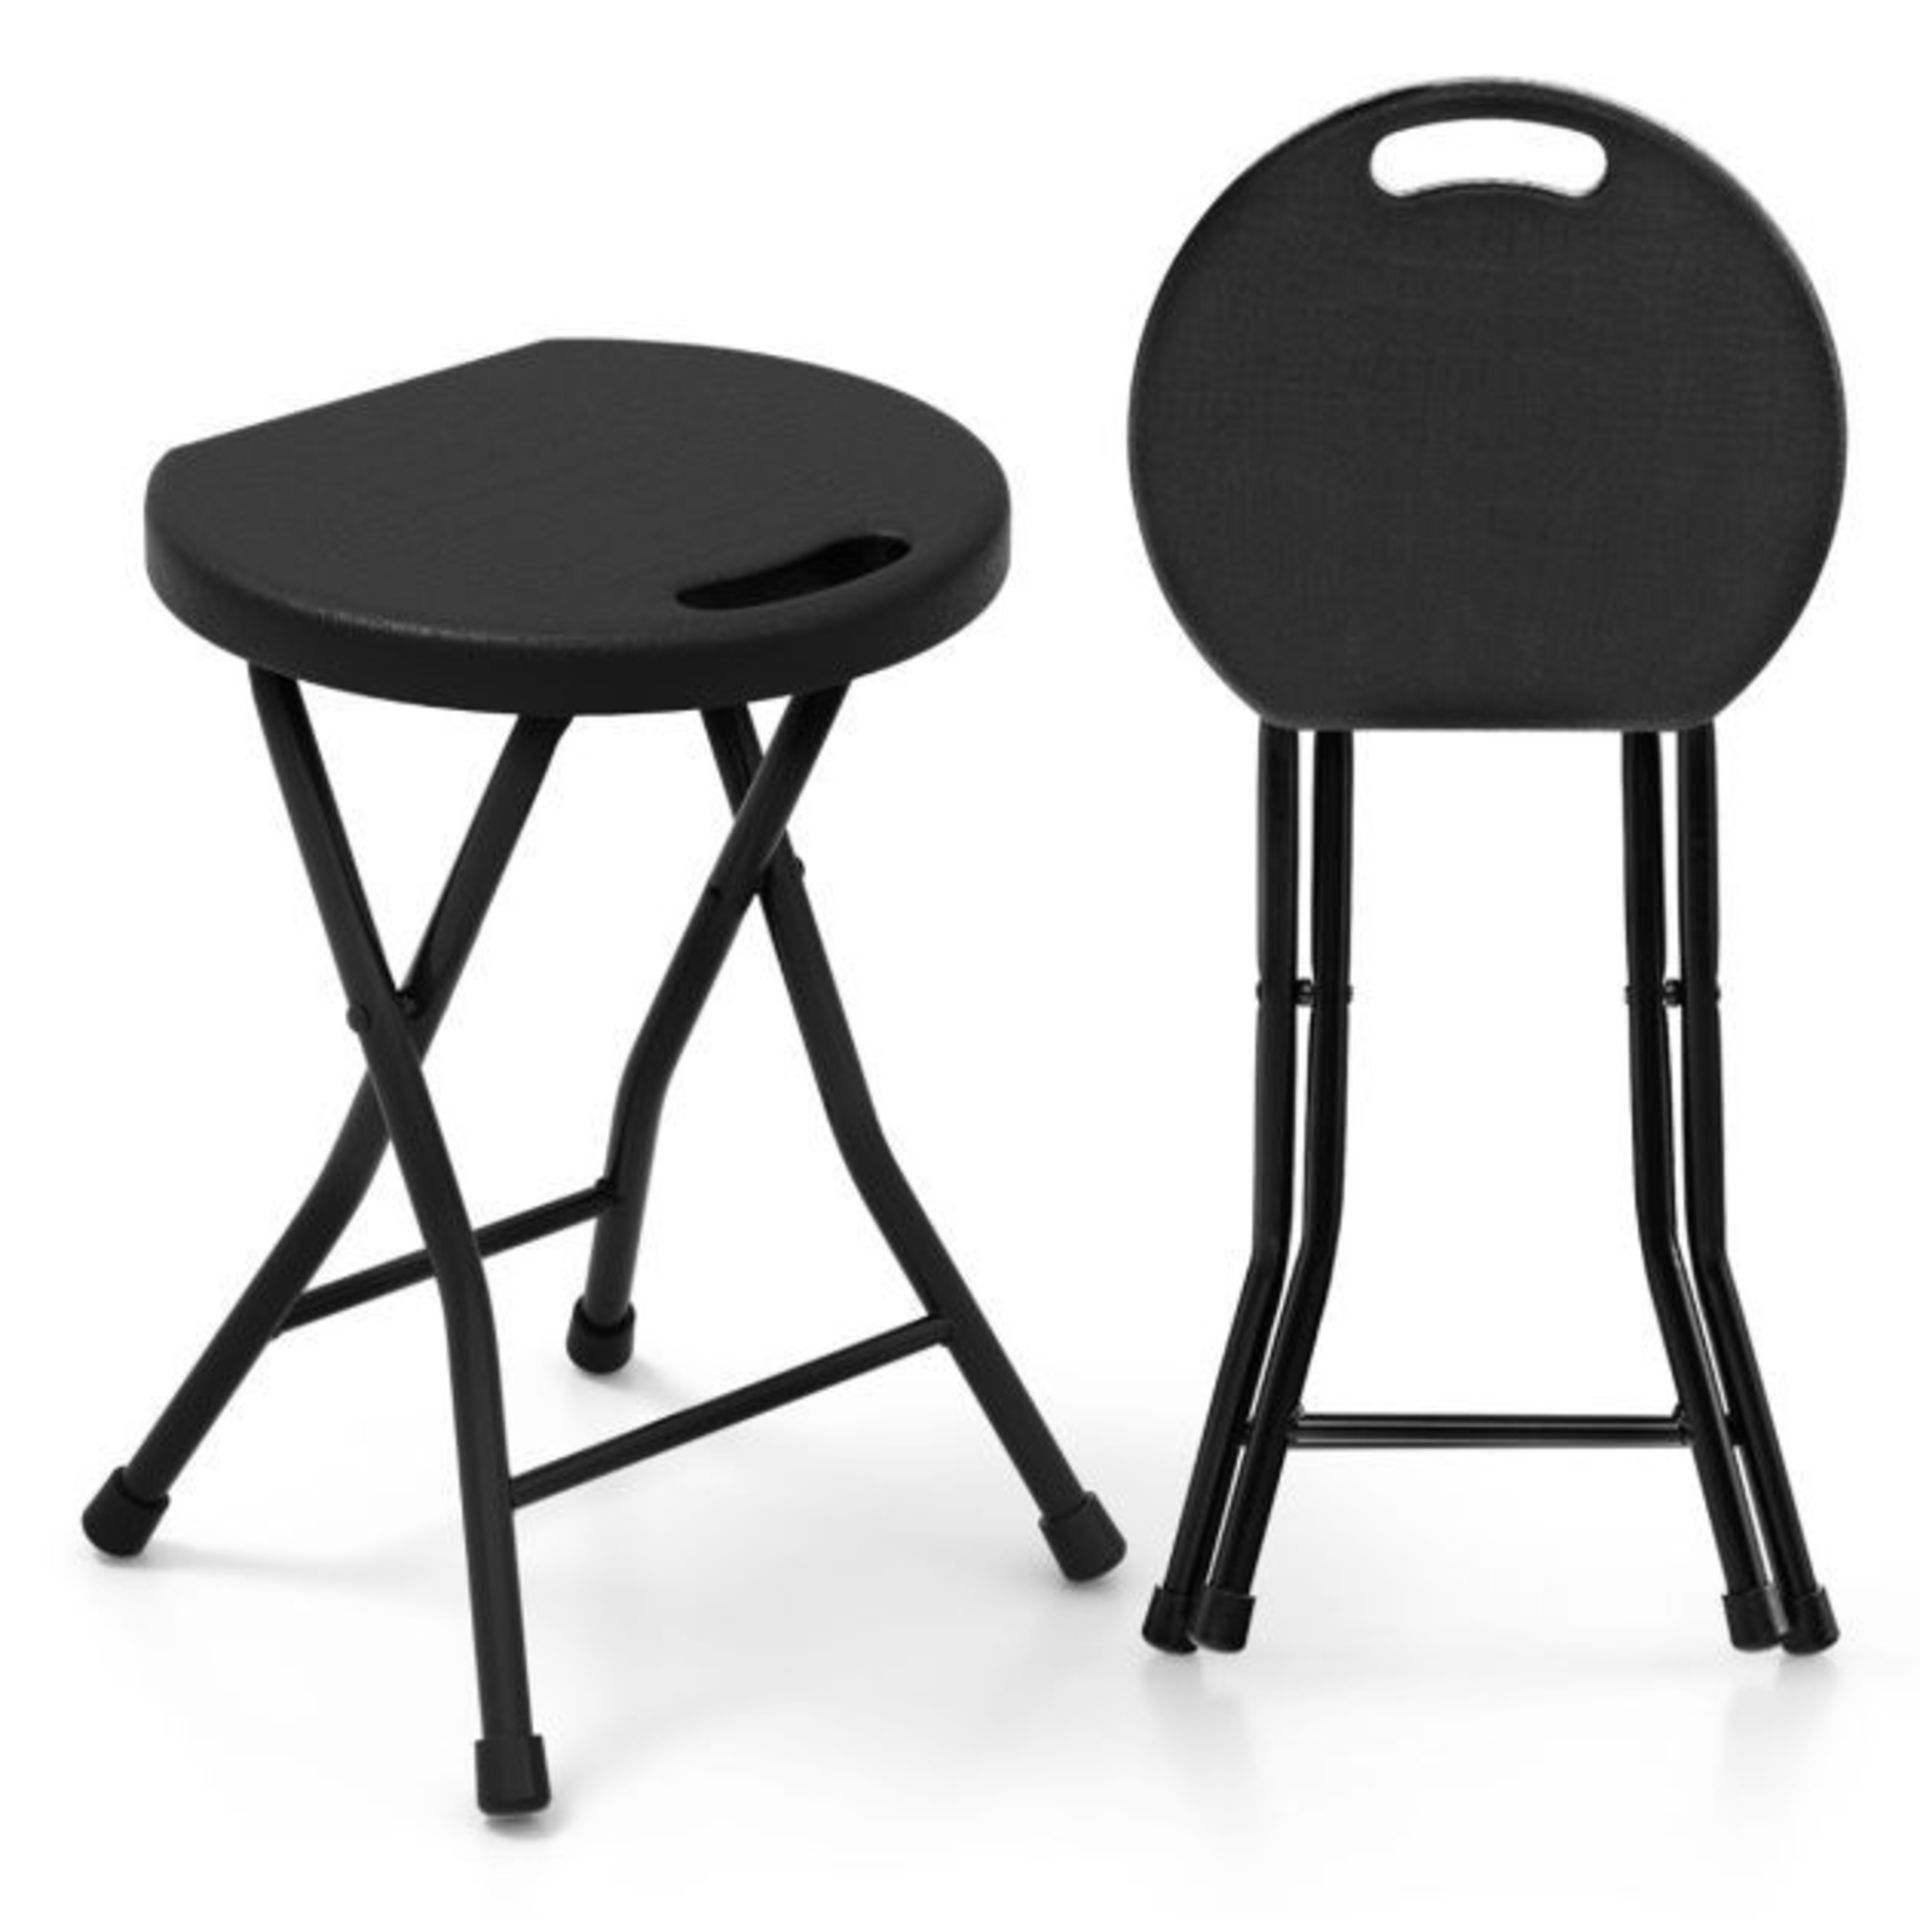 Set of 2 Plastic Folding Stool Seat with Built-in Handle. - ER53. With a fantastic folding design